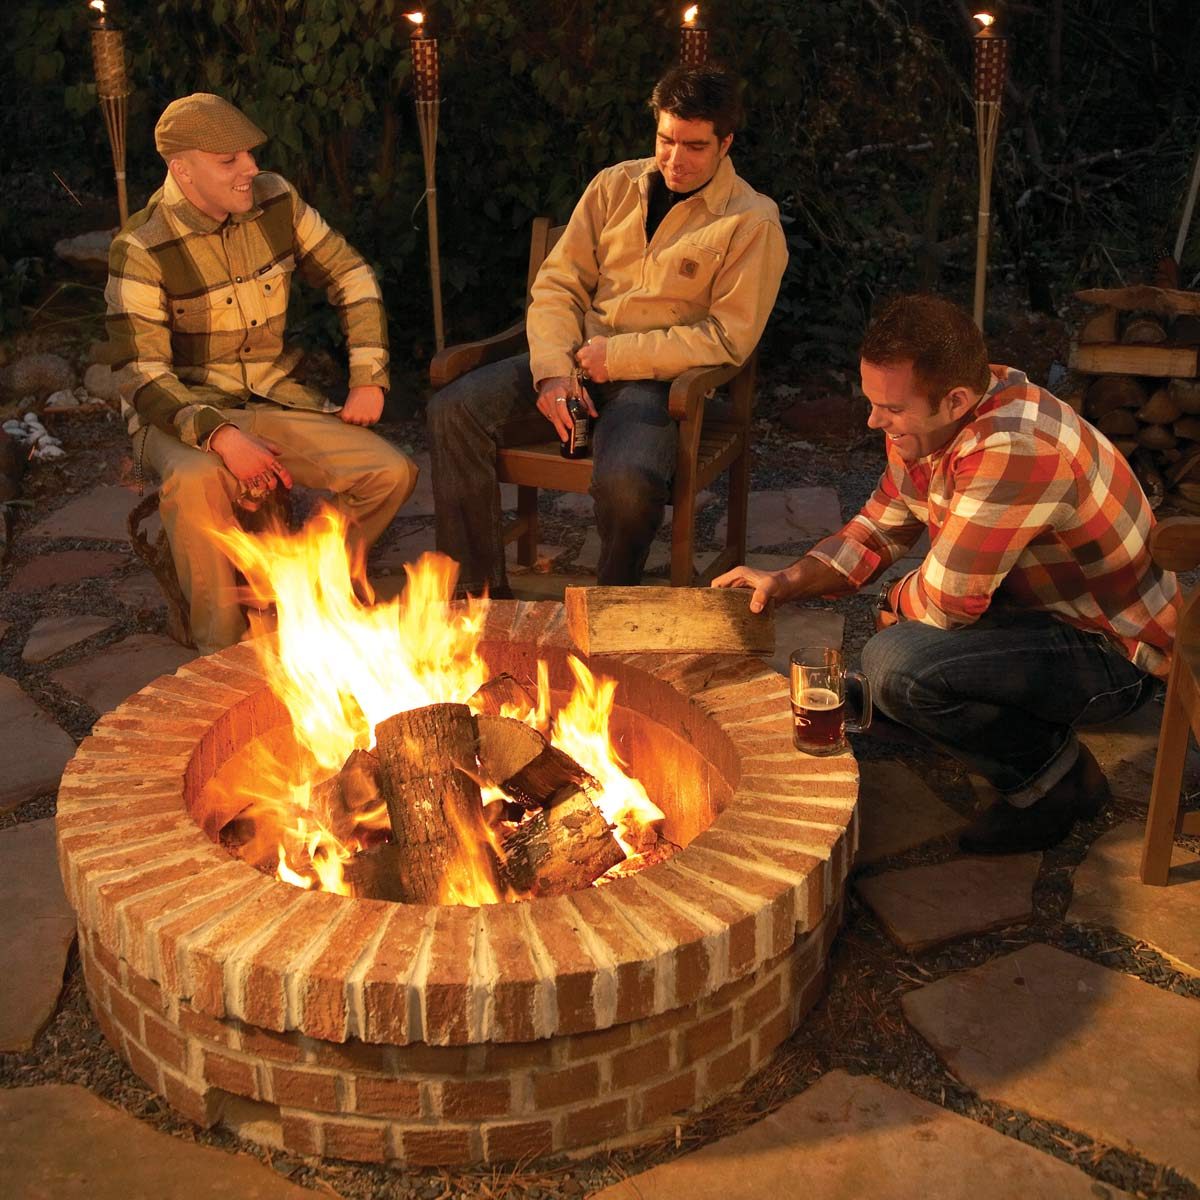 How To Choose the Right Fire Pit for Your Backyard!